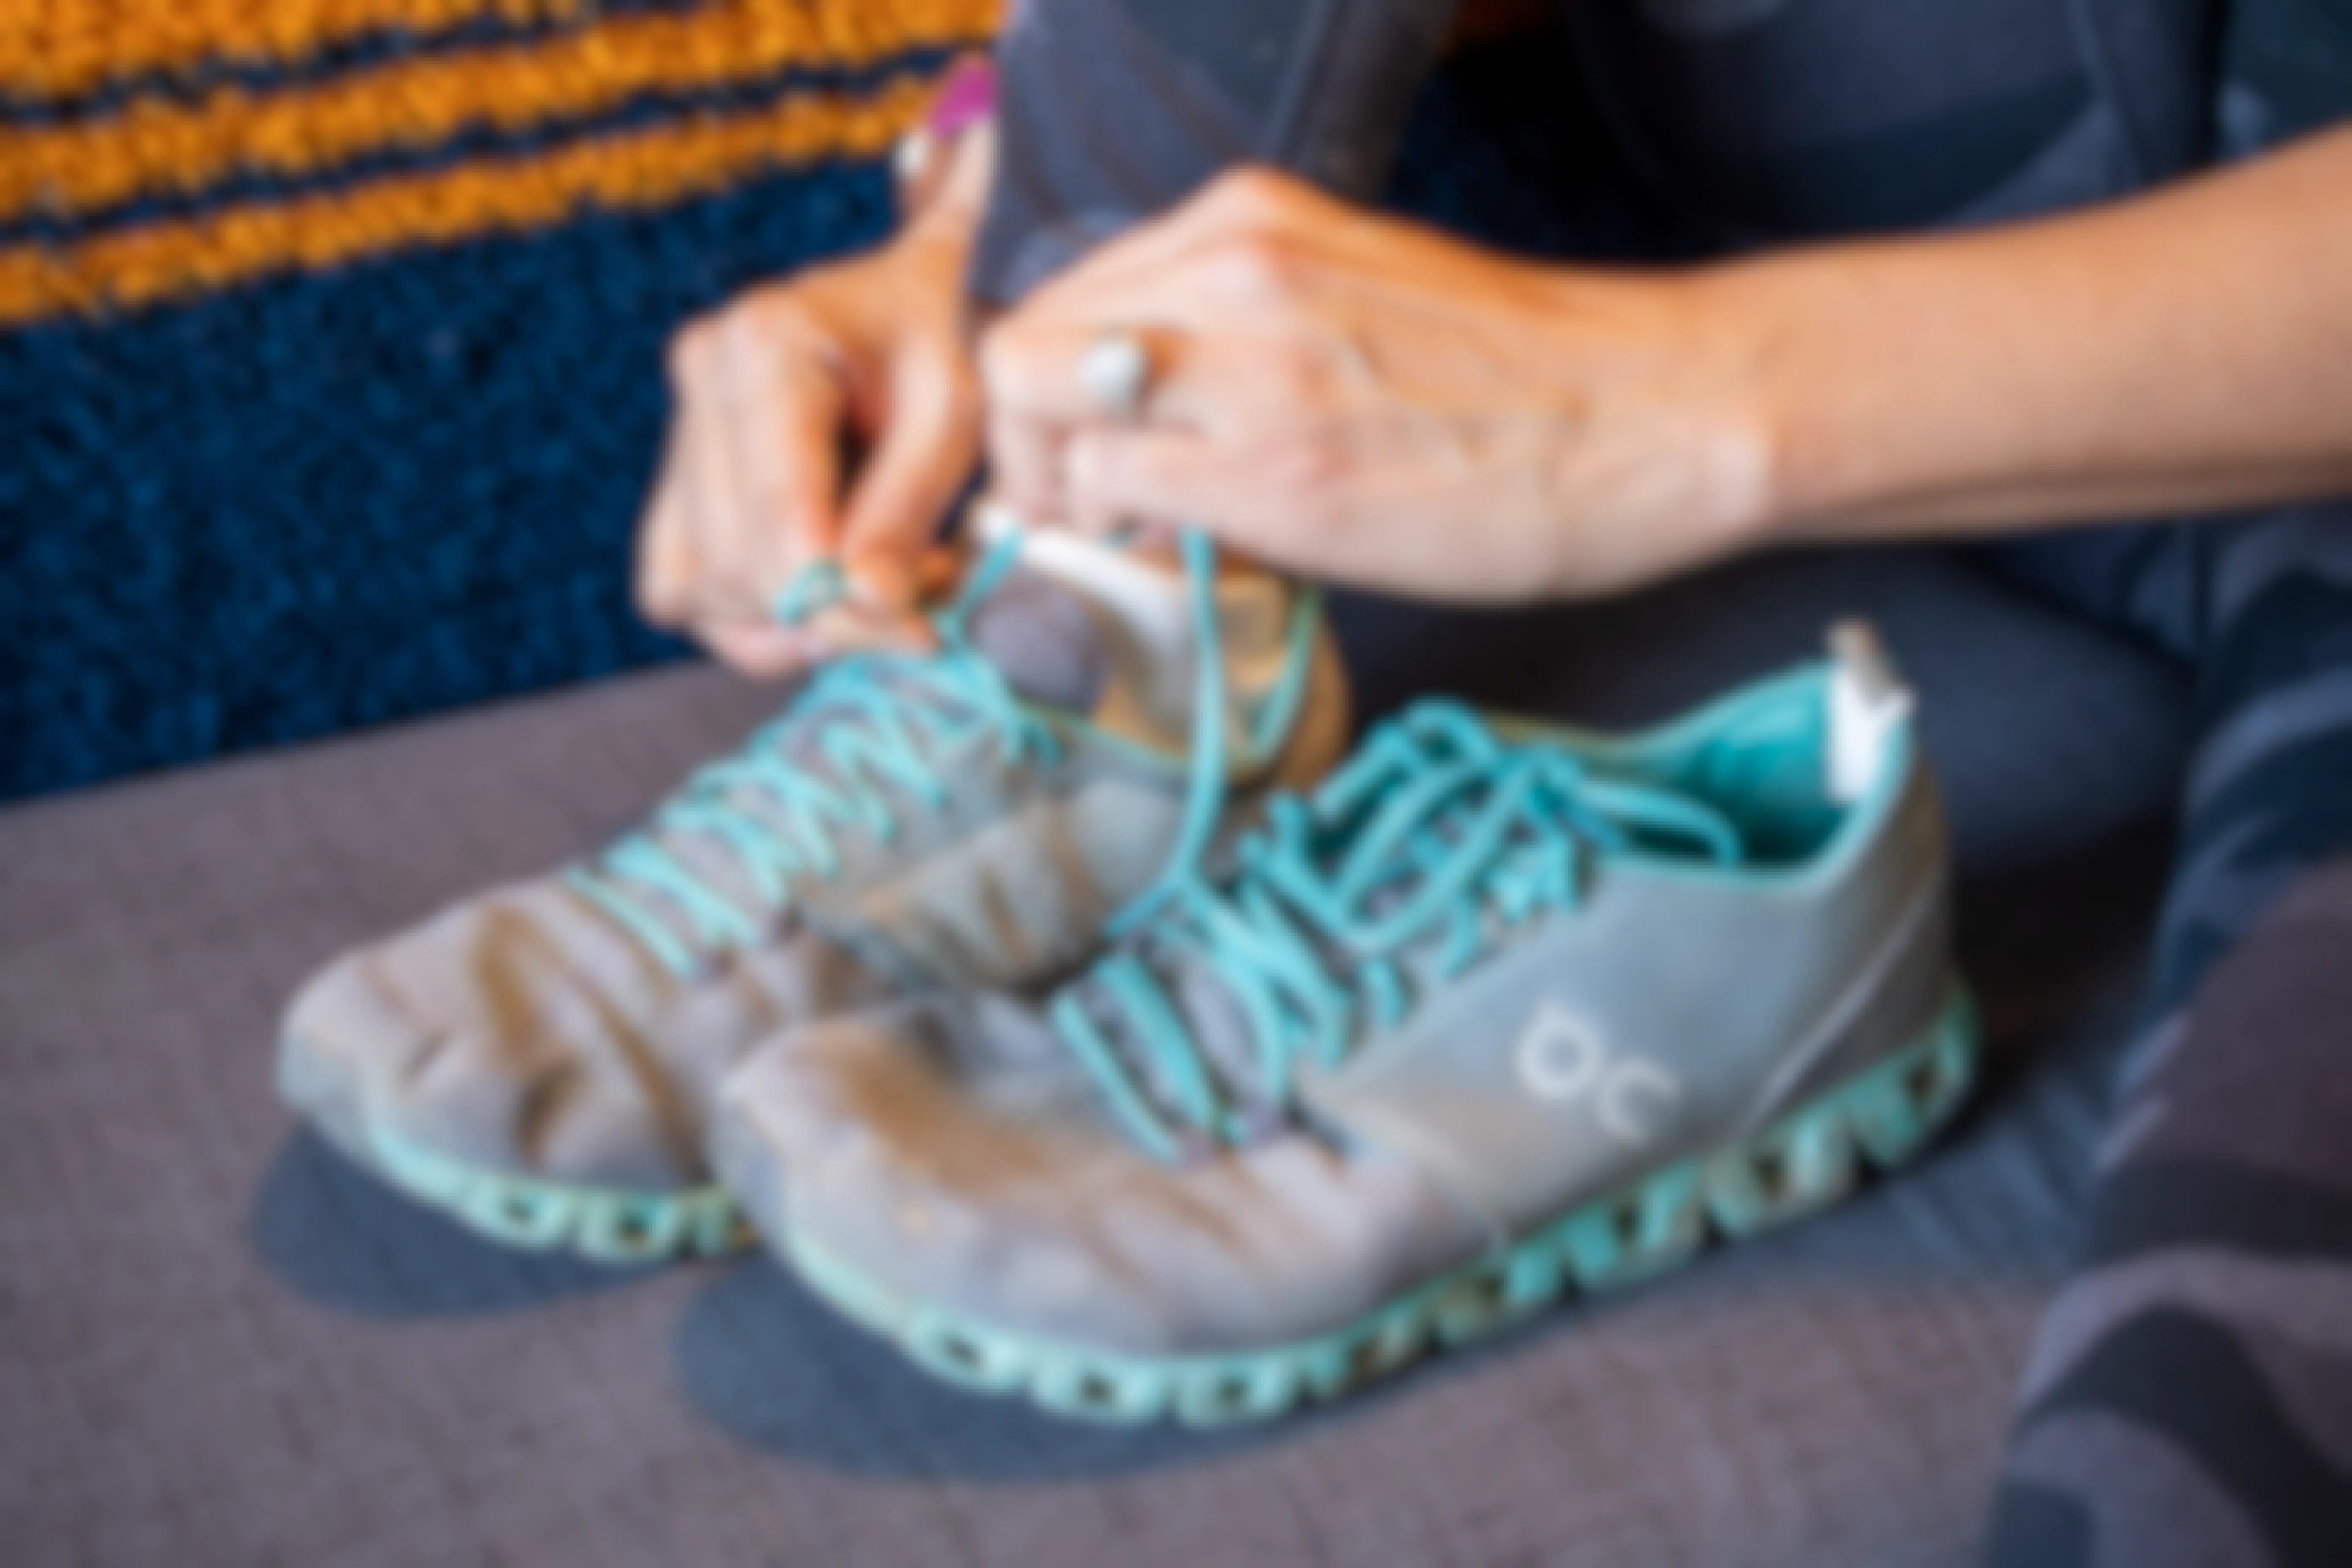 A woman tying the laces on a running shoe